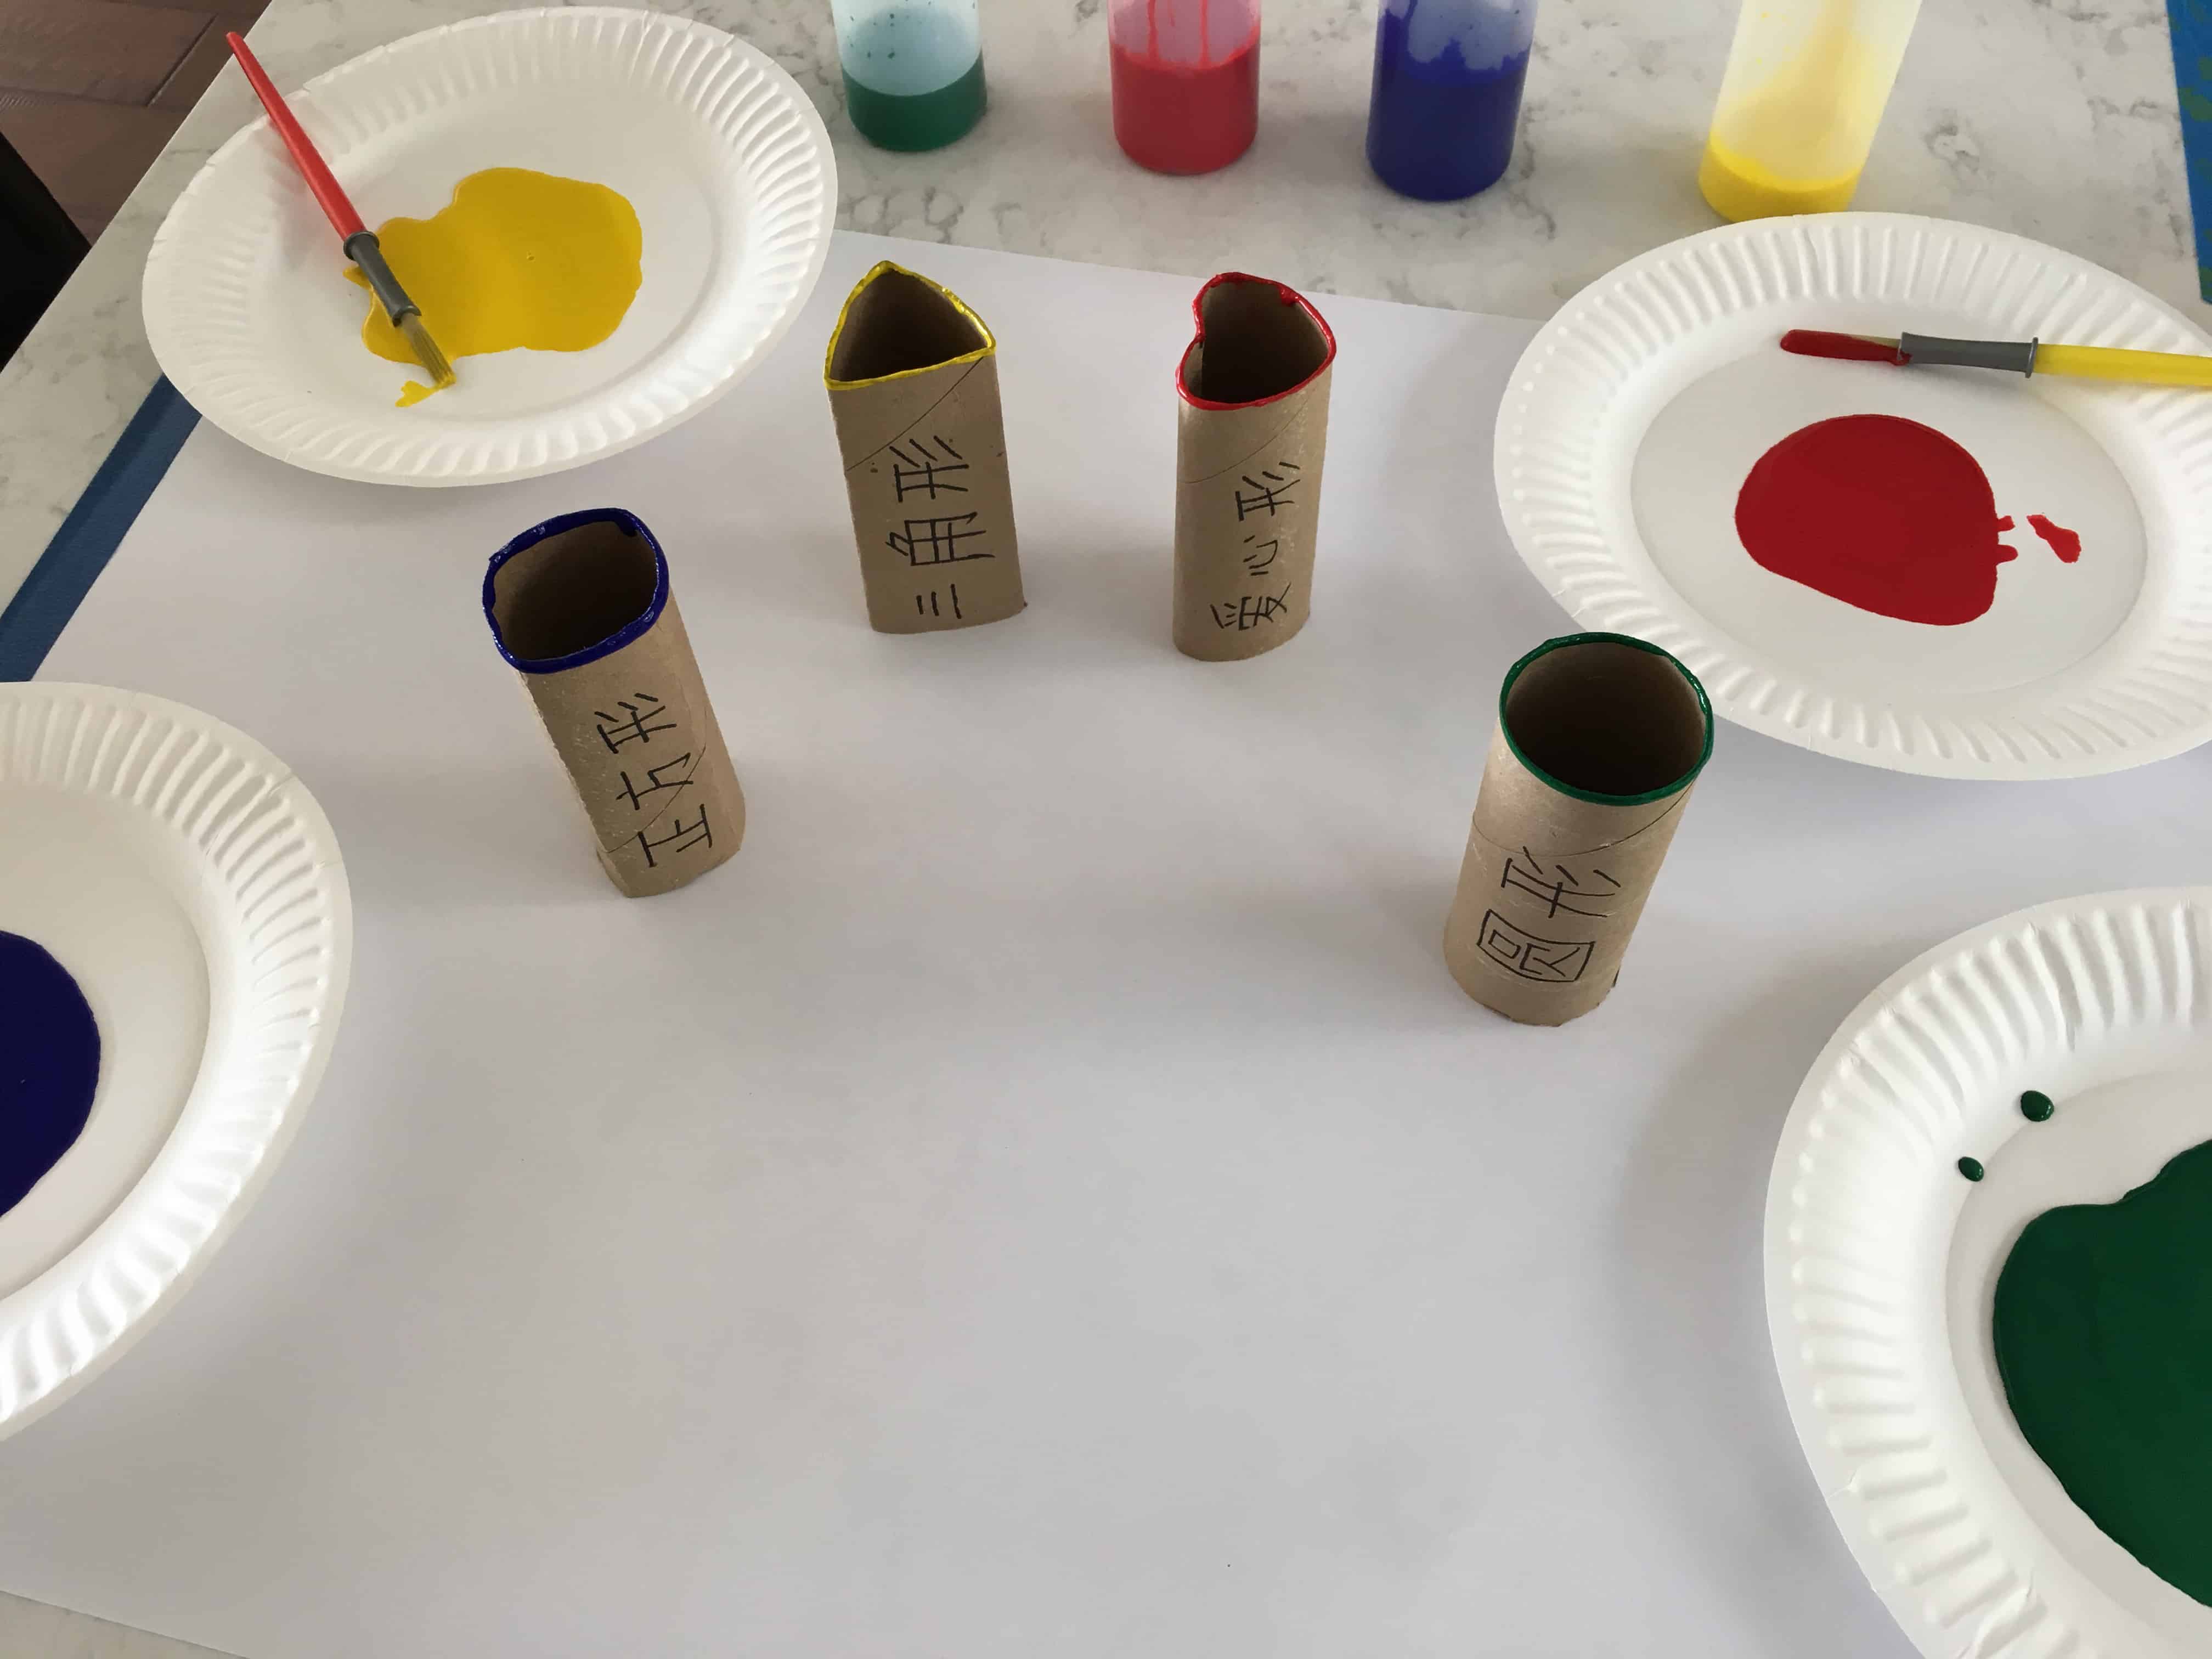 Paper roll shape stamping - recycled learning activity for kids